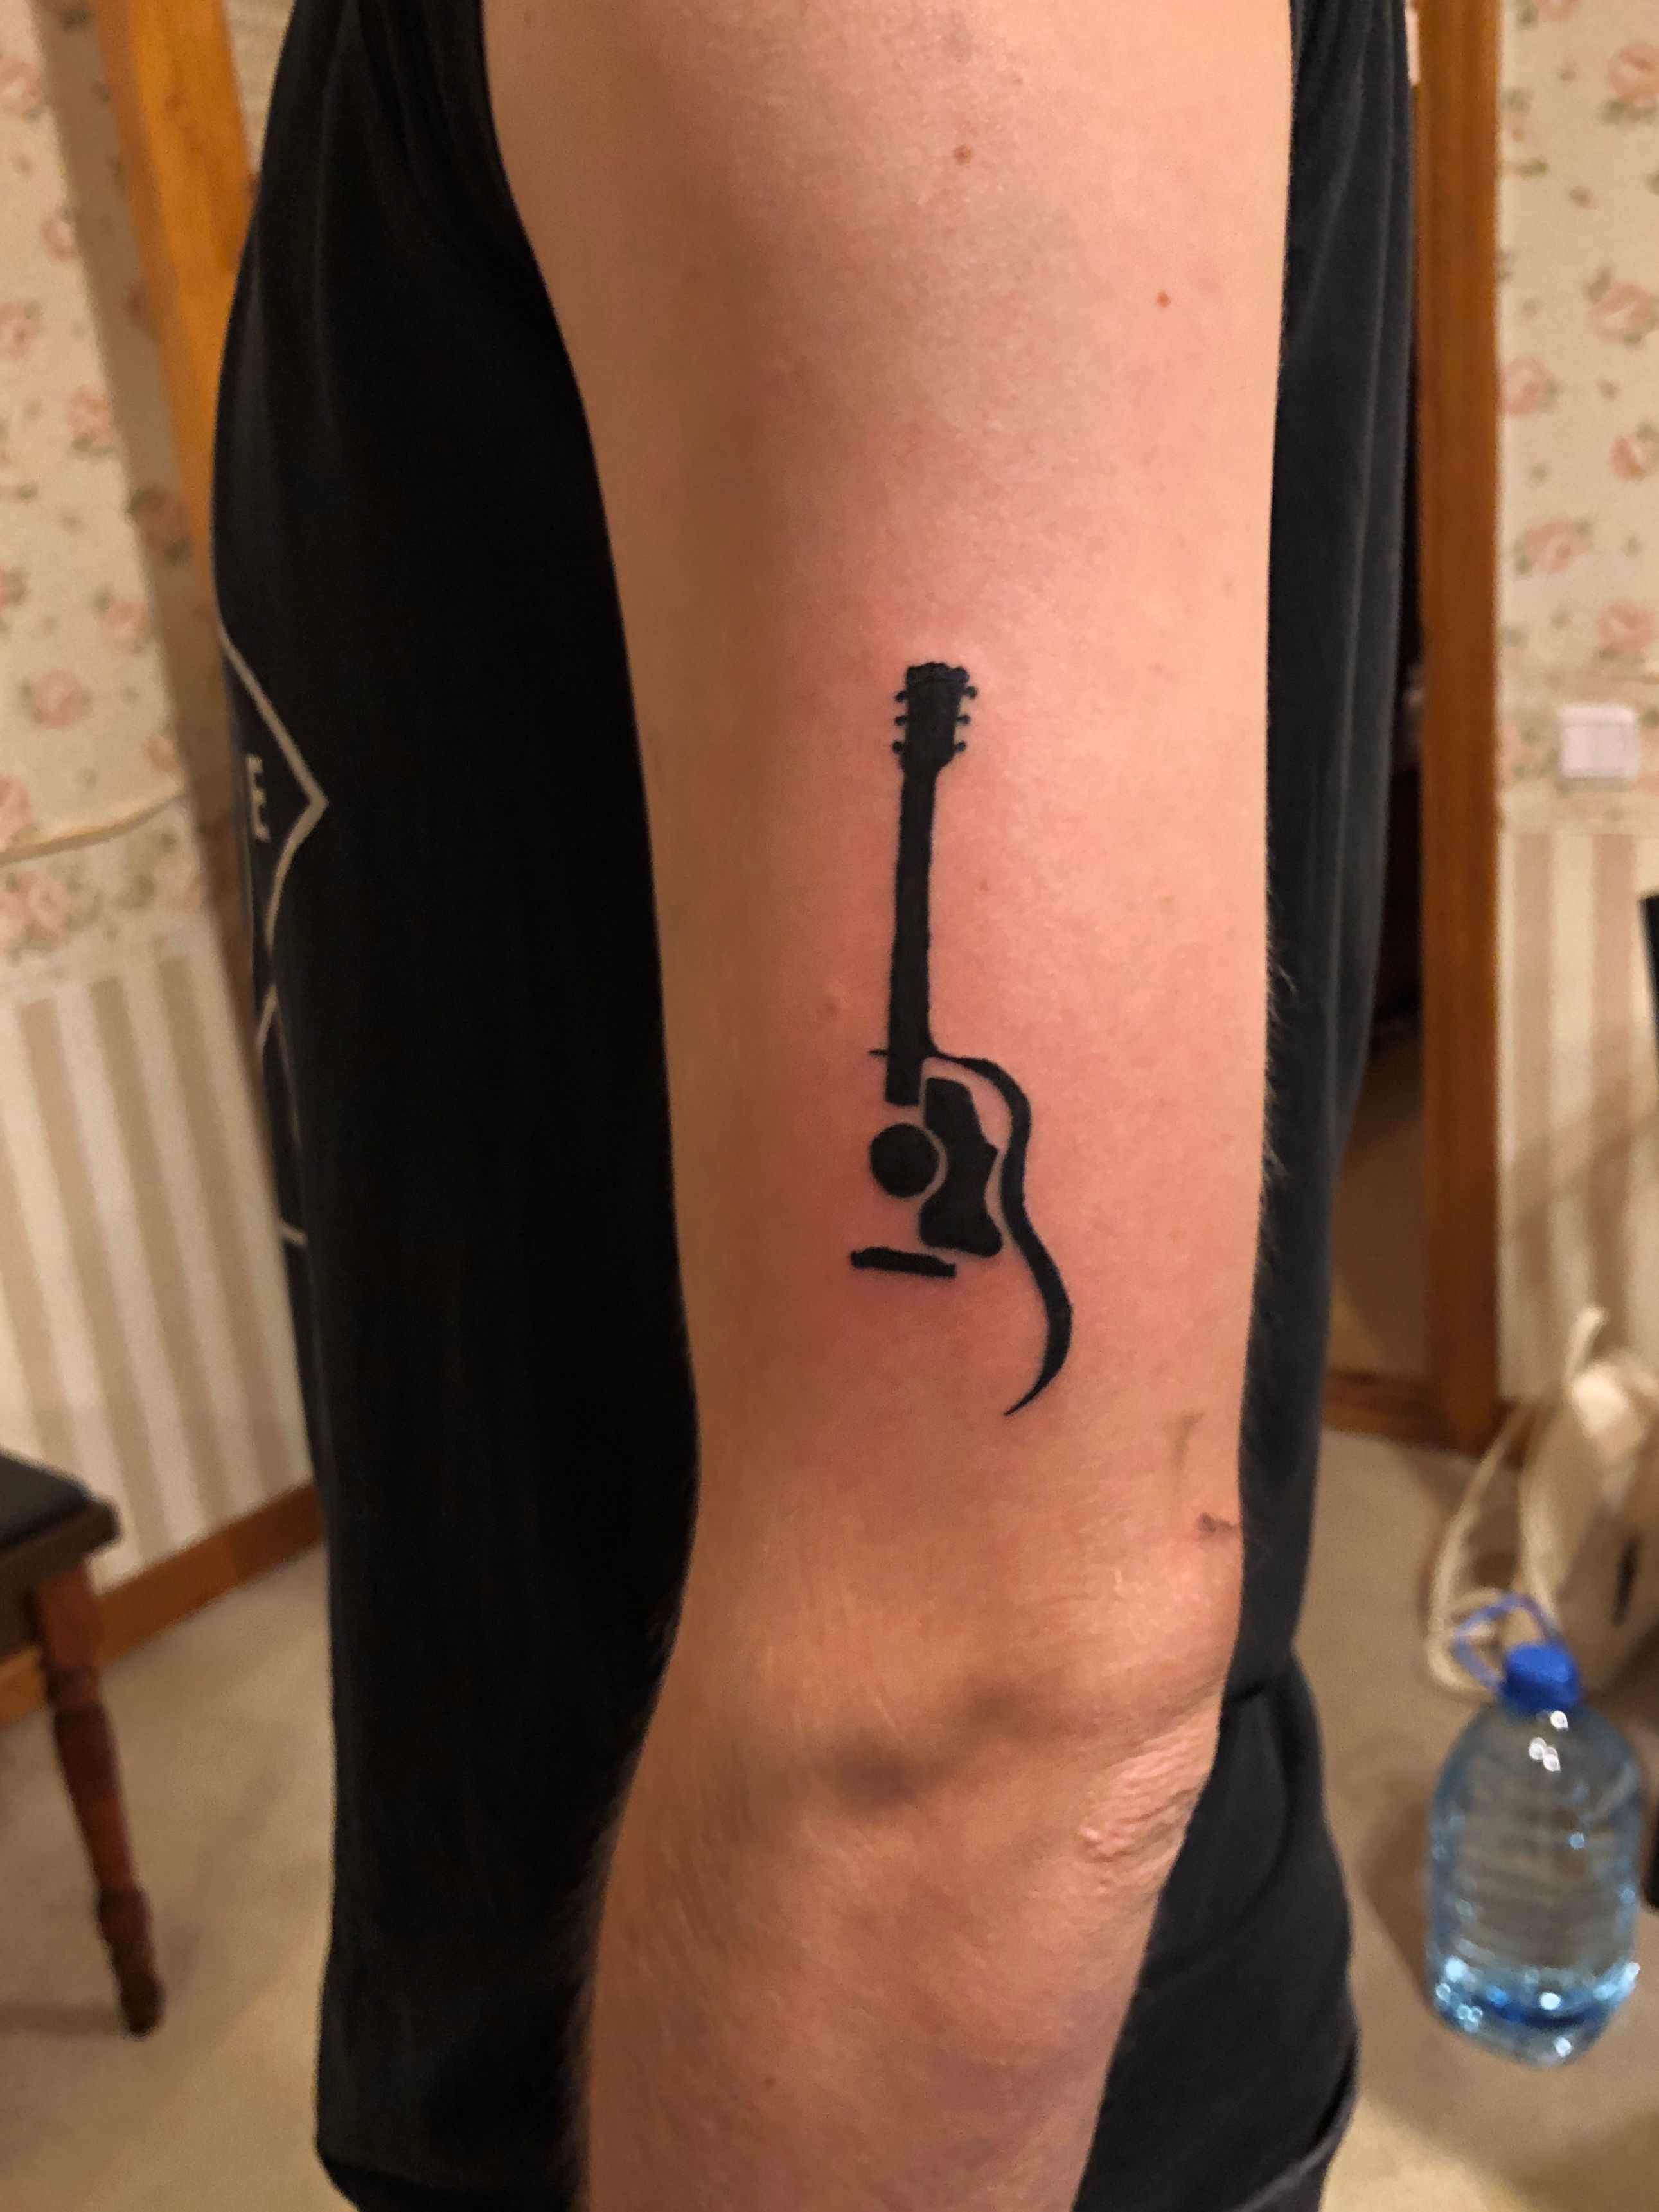 89+ Creative Music Tattoos That Are Sure to Blow Your Mind | WarmArt Tattoo  And Body Piercing